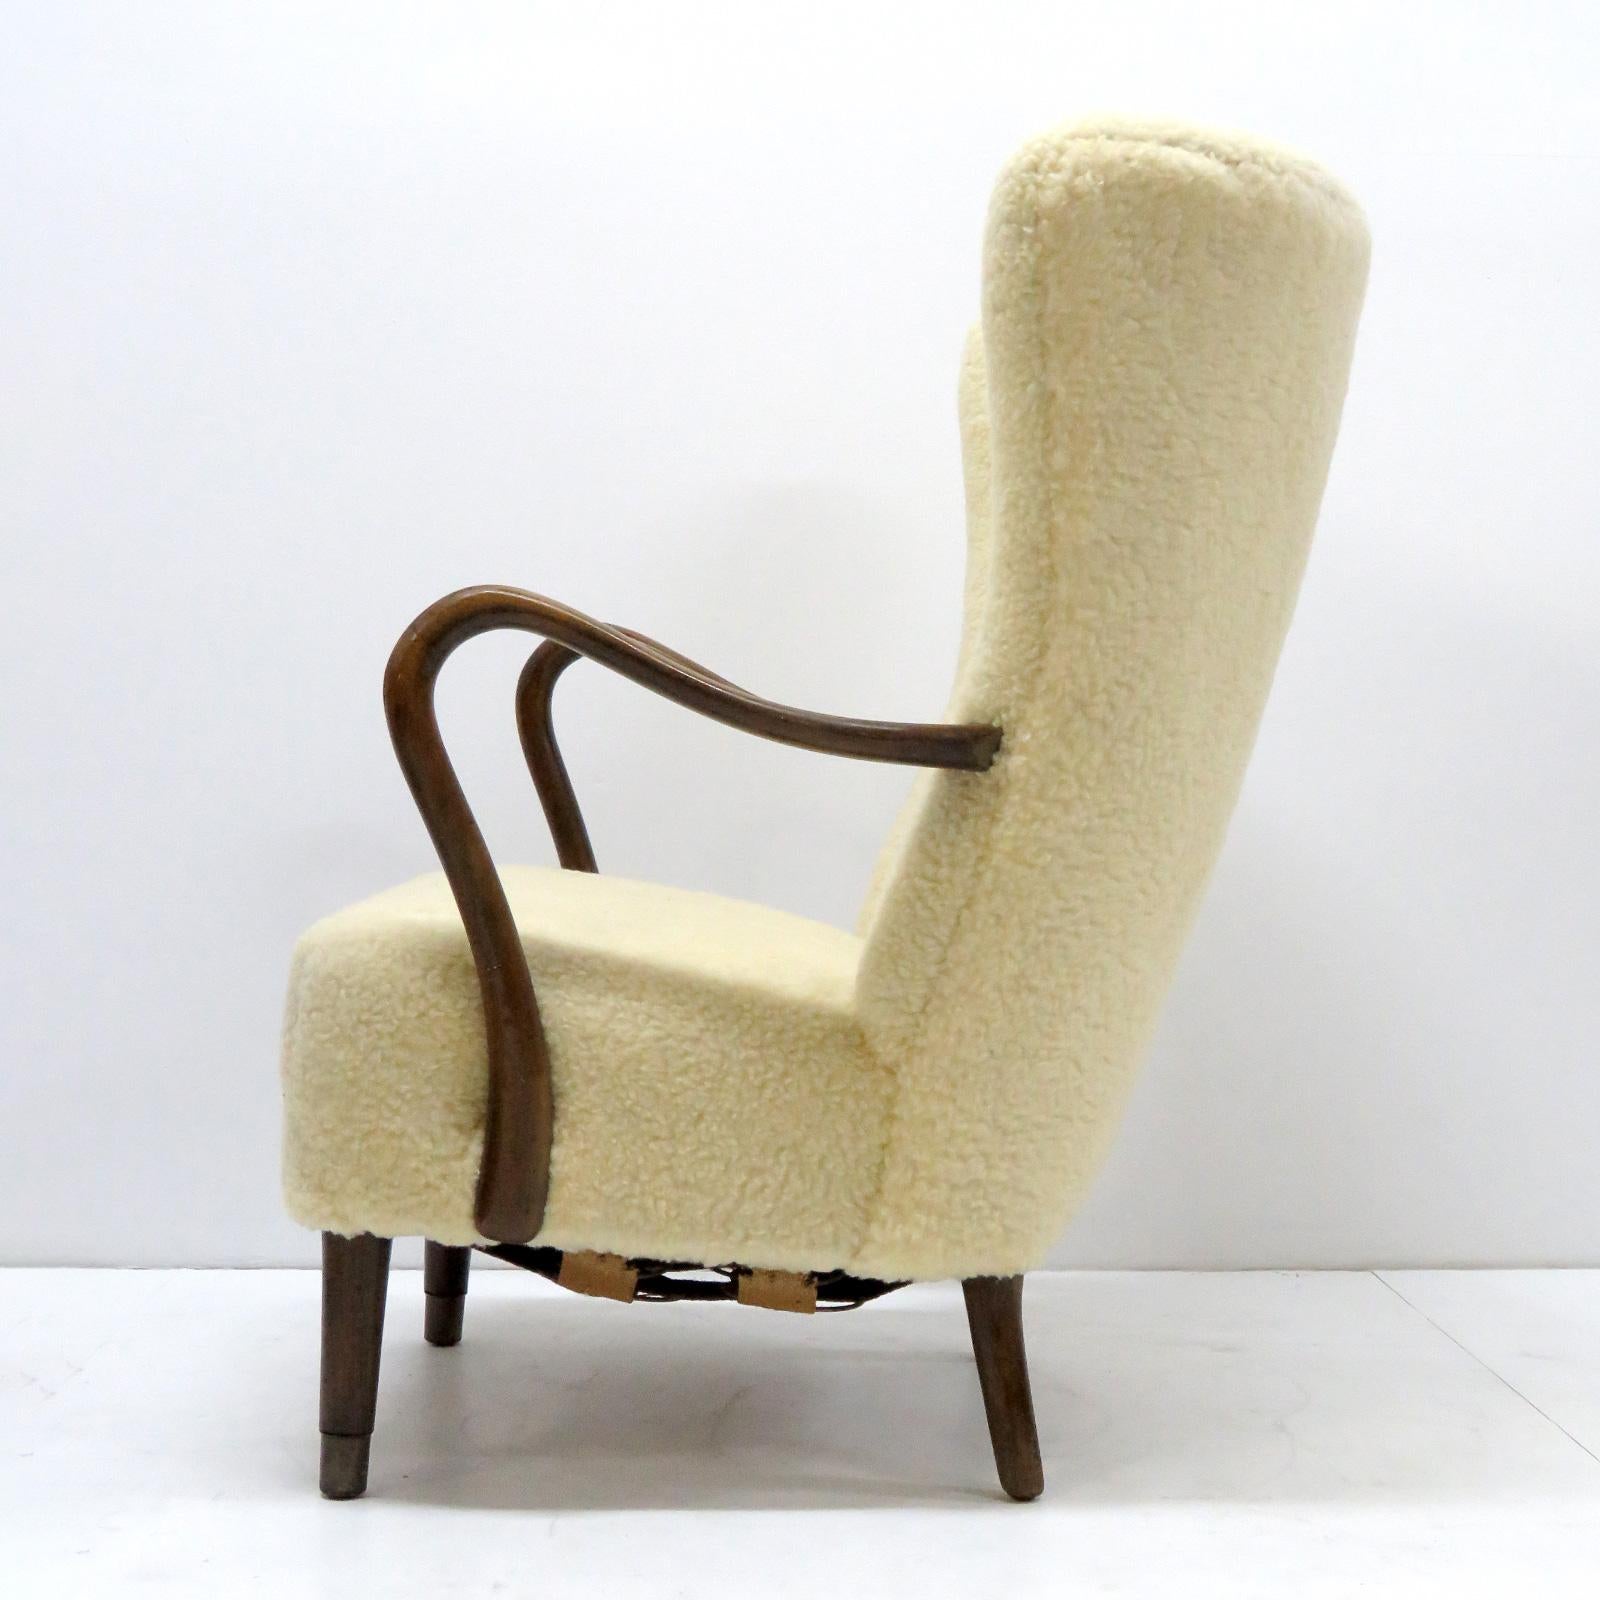 Upholstery Alfred Christensen Lounge Chair, 1940